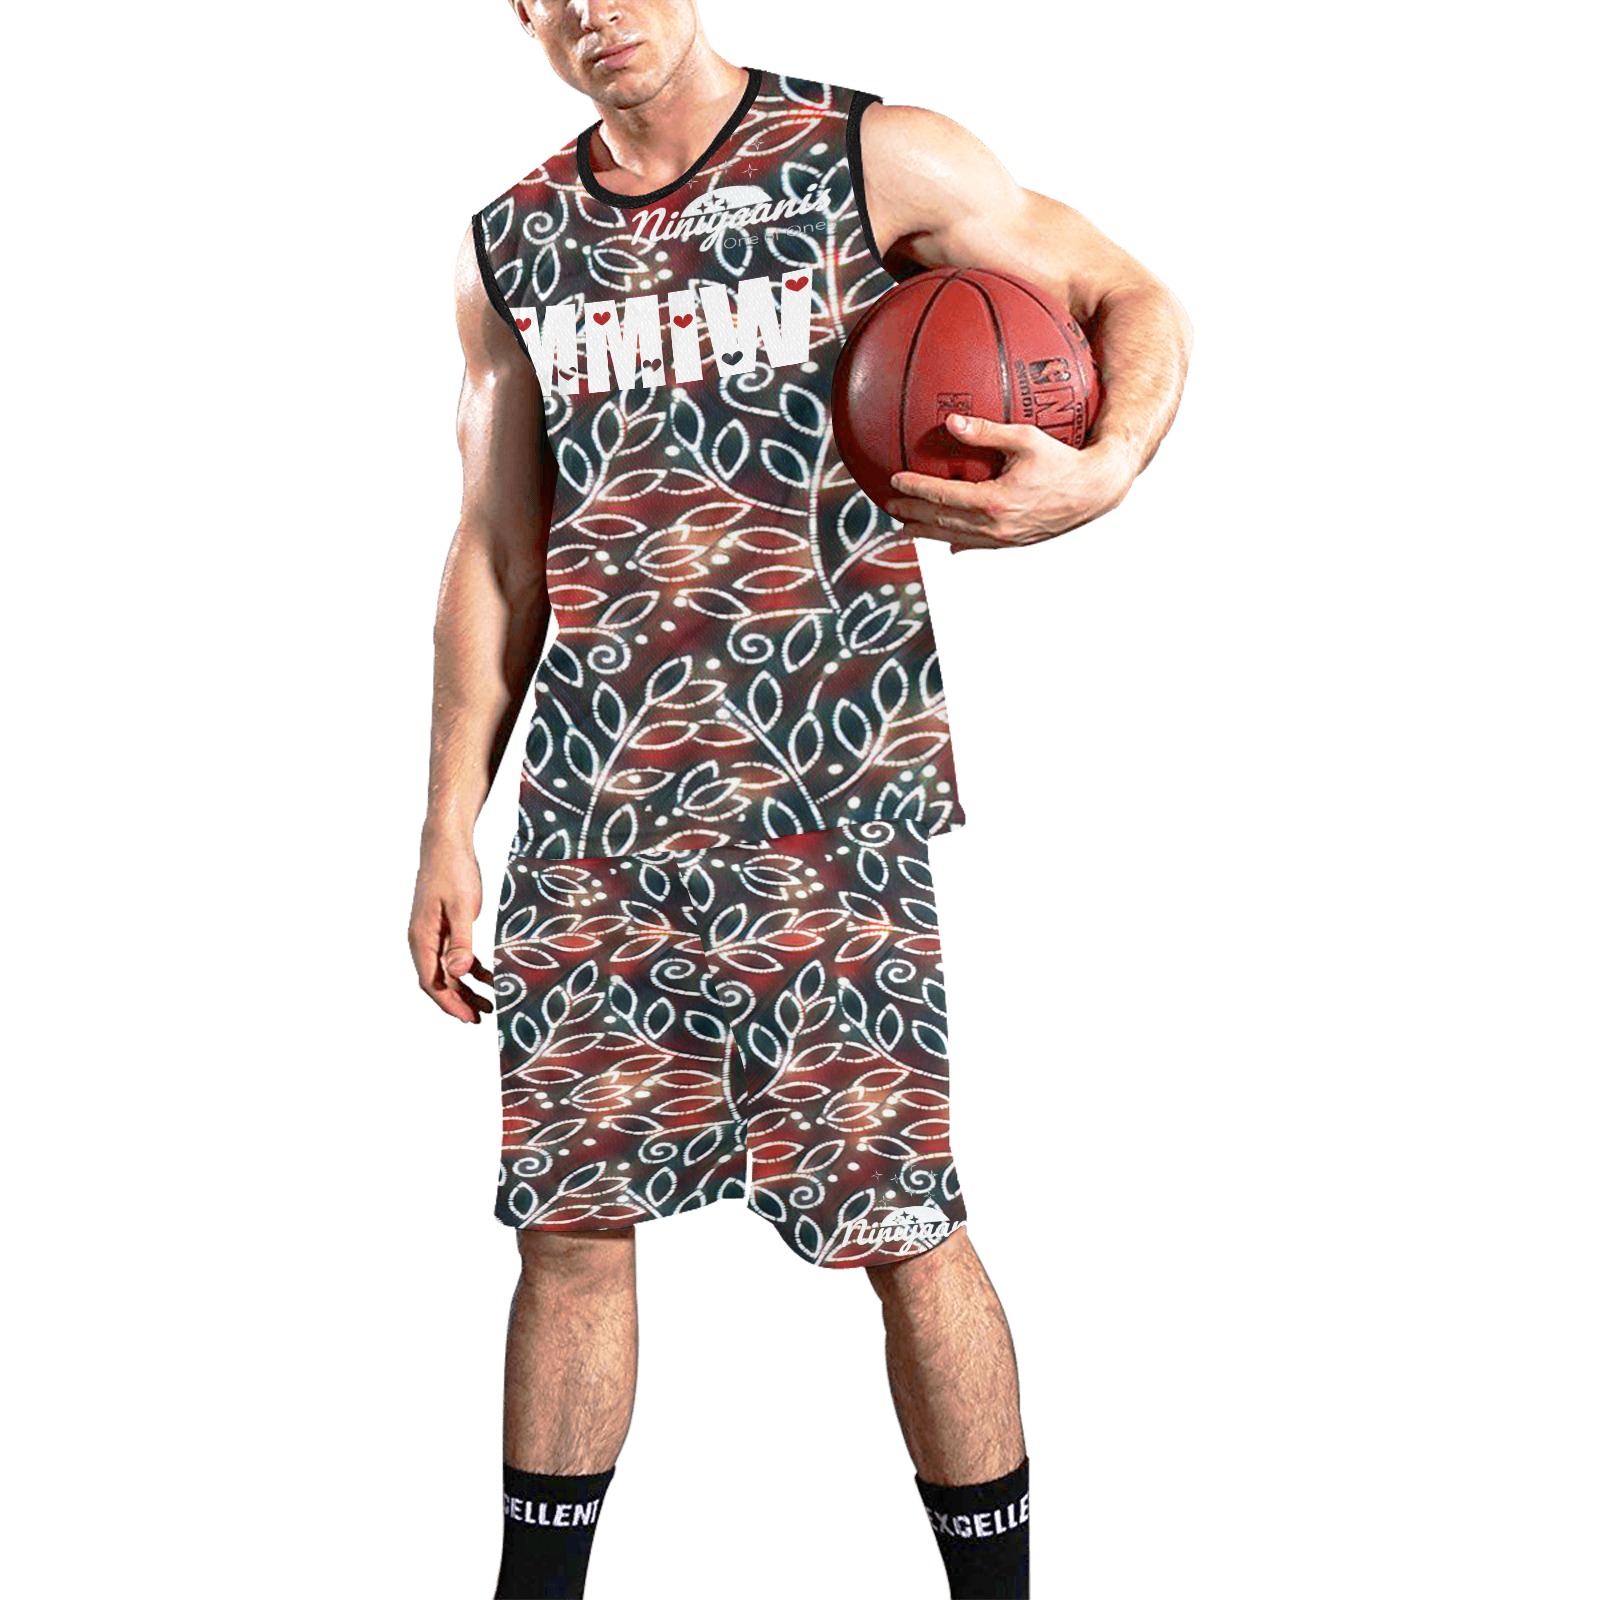 sommers 1 All Over Print Basketball Uniform